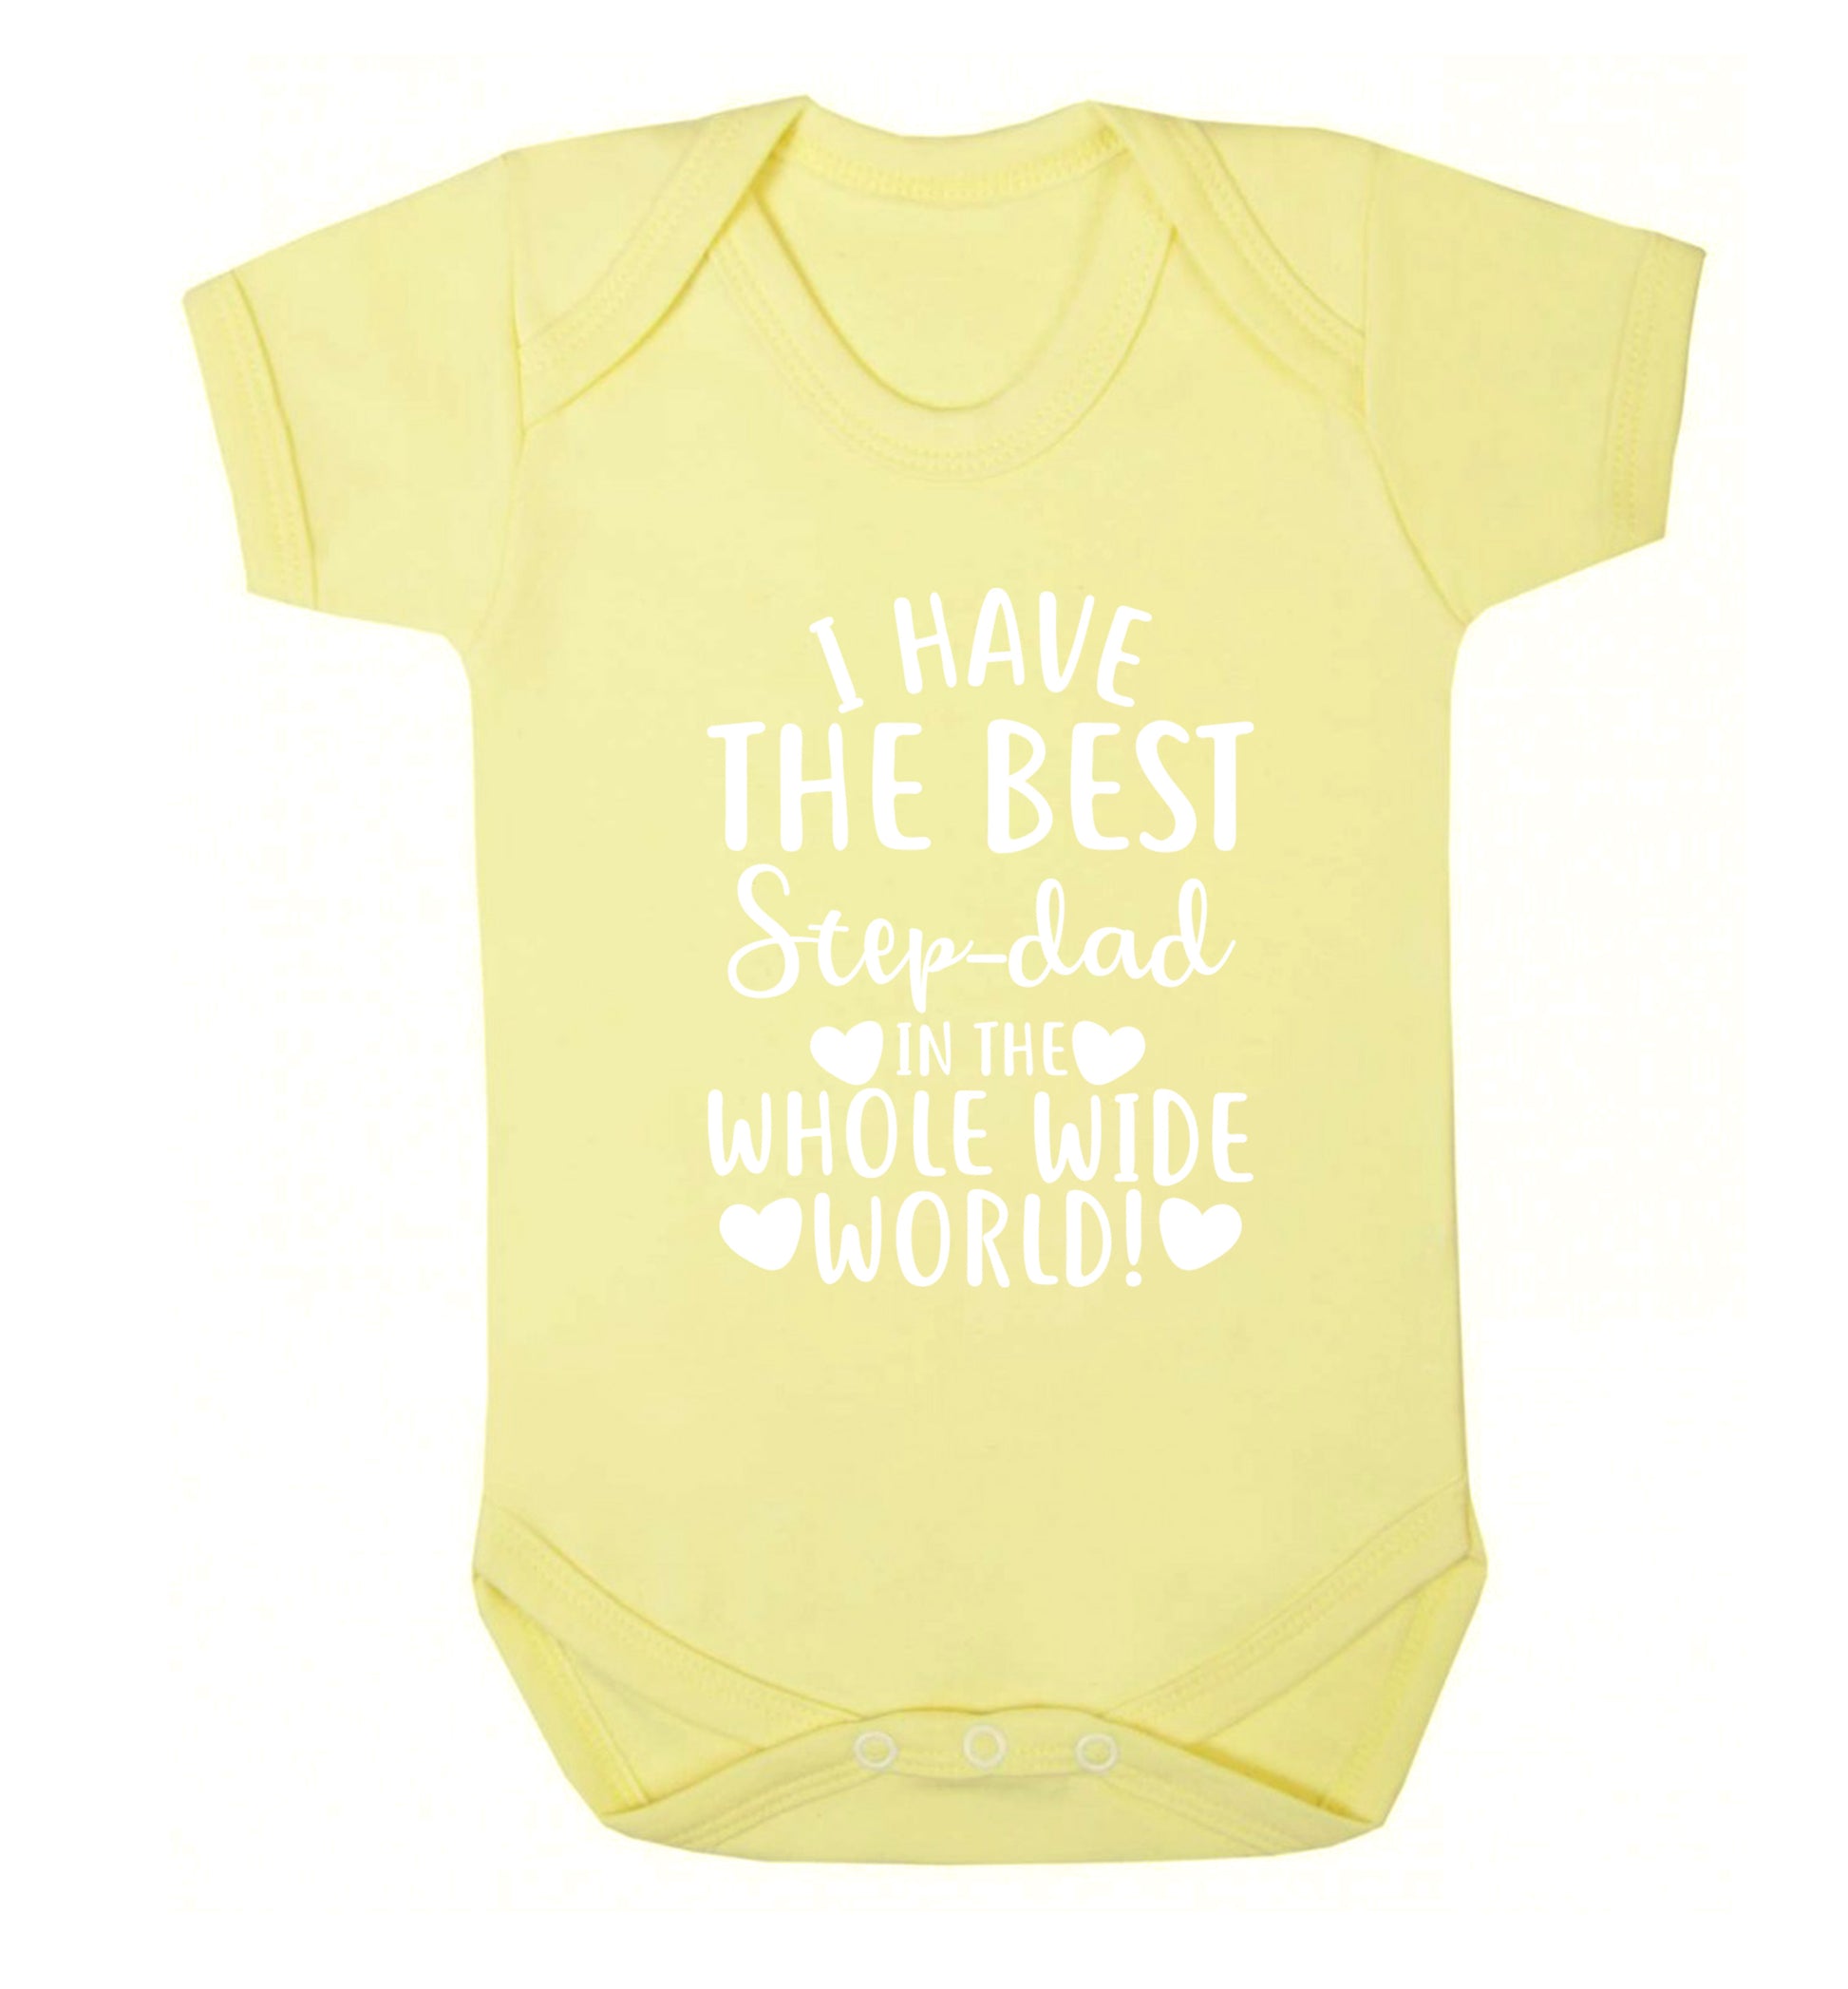 I have the best step-dad in the whole wide world! Baby Vest pale yellow 18-24 months